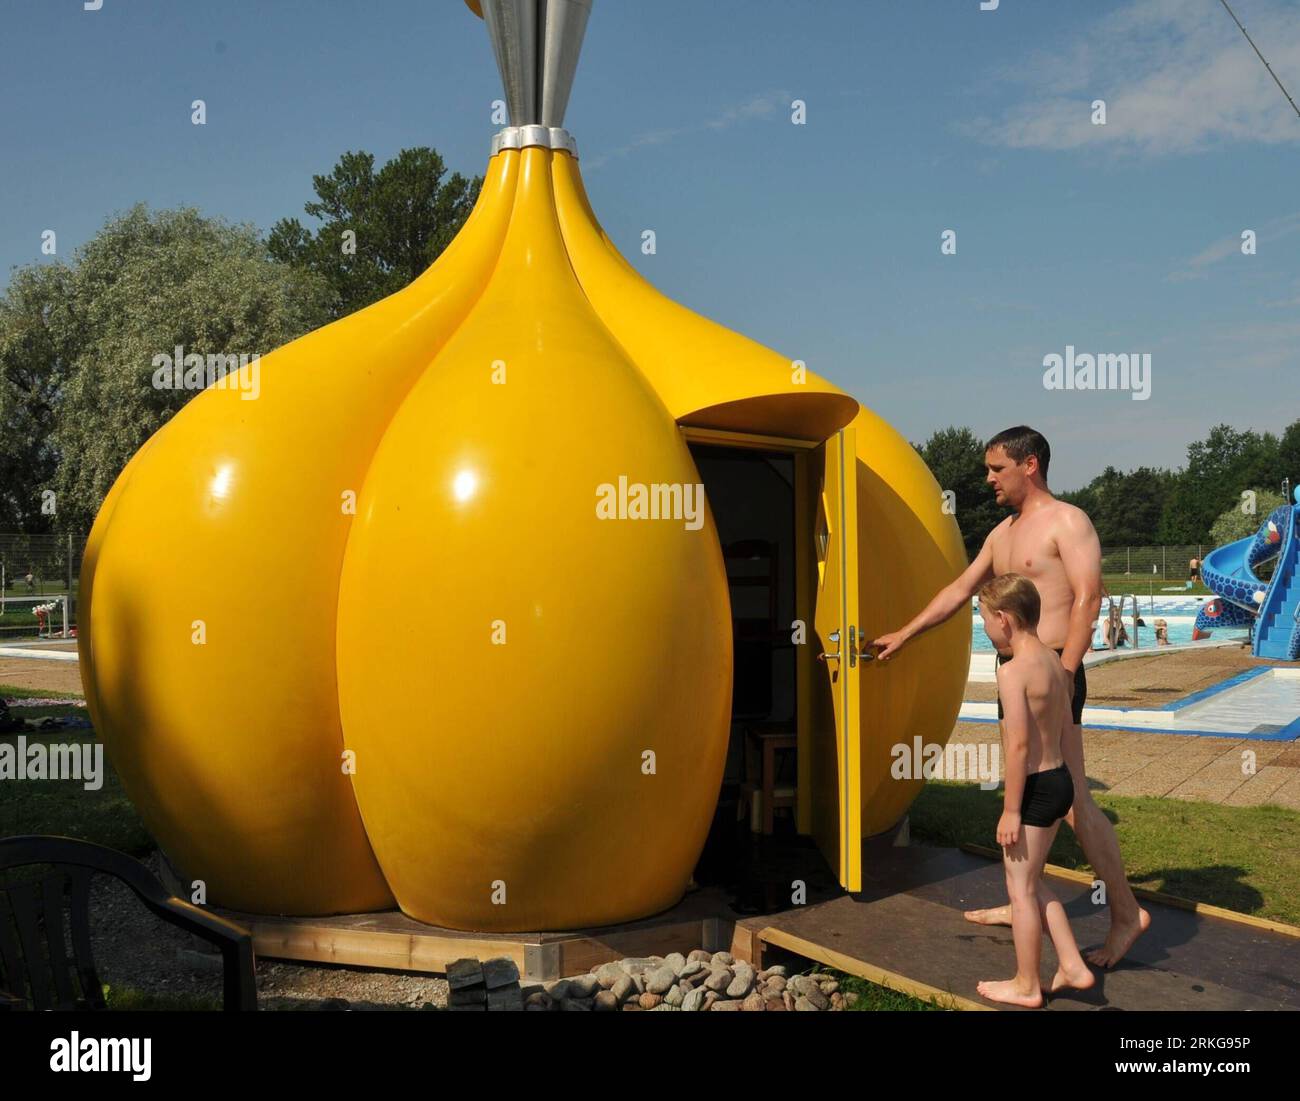 Bildnummer: 55567398  Datum: 02.07.2011  Copyright: imago/Xinhua (110704) -- TURKU, July 4, 2011 (Xinhua) -- Customers get into the Sounding Dome Sauna which is shaped like a garlic bulb and has its own sound scape that changes with the temperature and the humidity inside, in Turku, Finland, July 2, 2011. Several art saunas designed by different artists will be opened to the public from June to August in Turku, the 2011 European Capital of Culture, to show the unique culture of Finland. (Xinhua/Zhao Changchun) (qhs) FINLAND-TURKU-ART SAUNAS PUBLICATIONxNOTxINxCHN Gesellschaft Sauna Wellness La Stock Photo